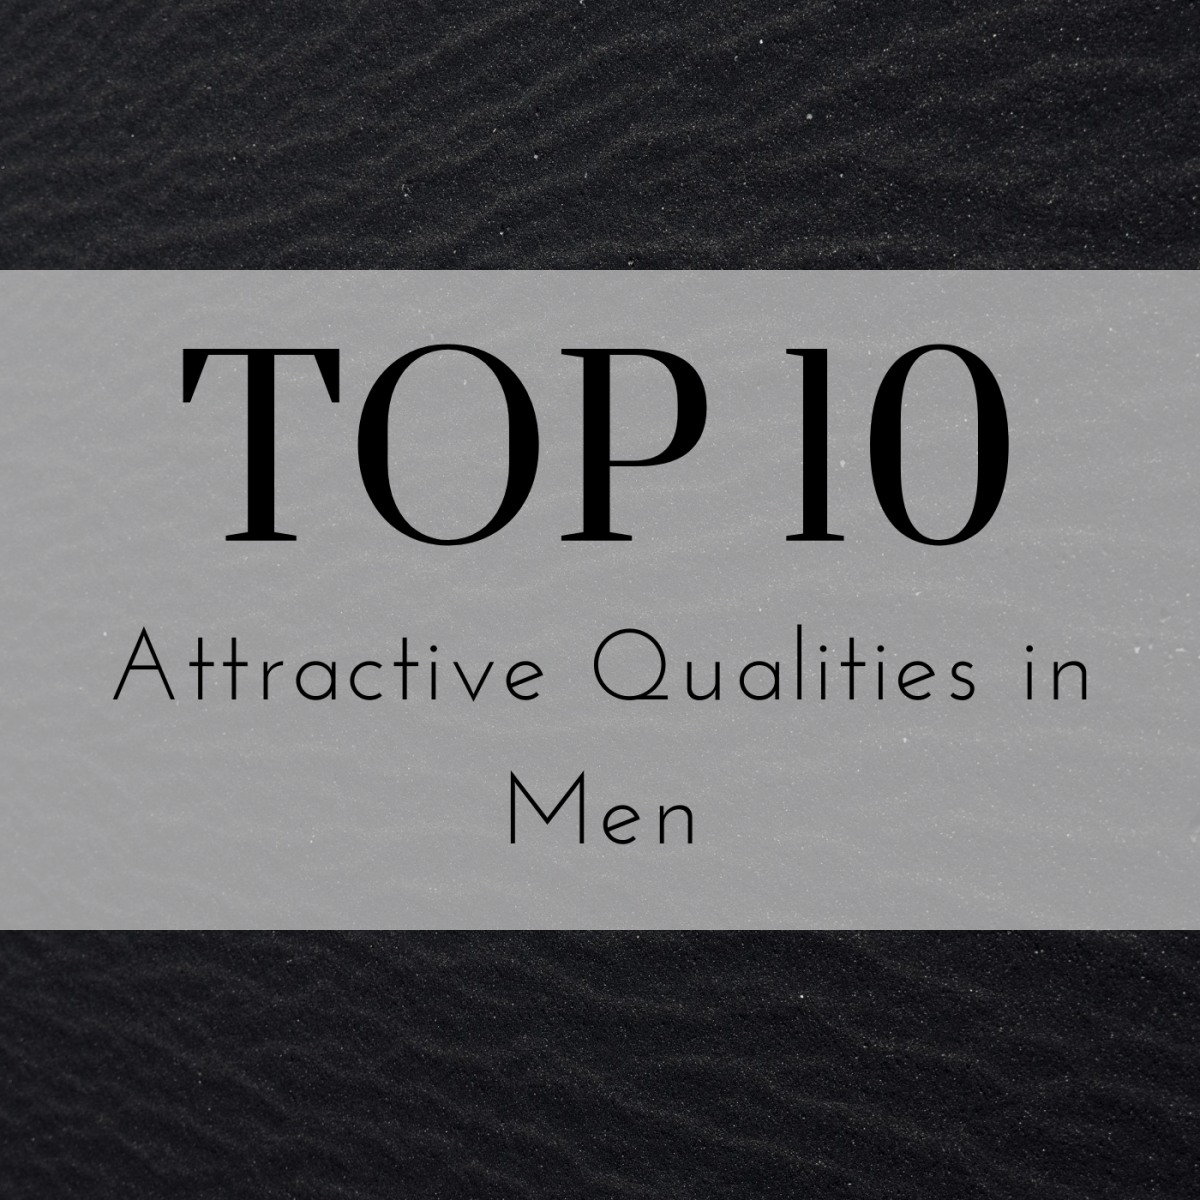 Learn the top 10 ways to become a more attractive man.